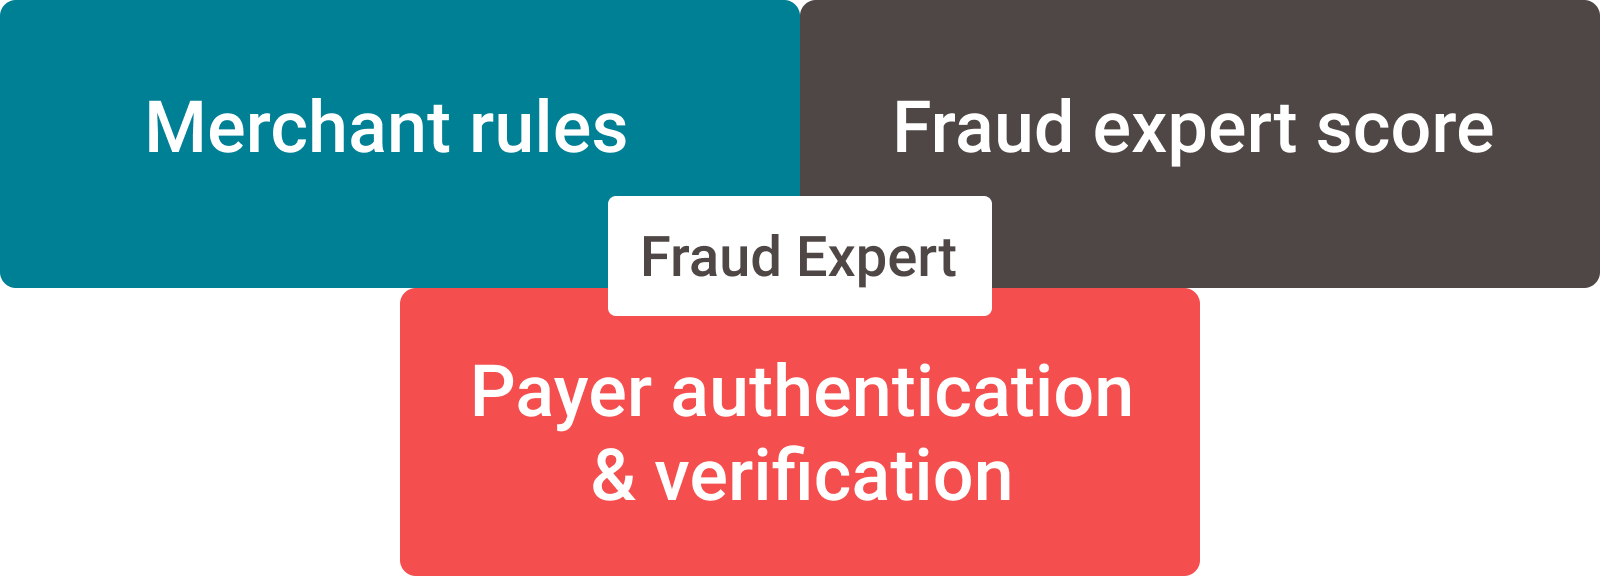 The image above shows a graphical representation of how the three components merchant rules/Fraud Expert Score/Payer authentication and verification are combined to the Fraud Expert Scoring.